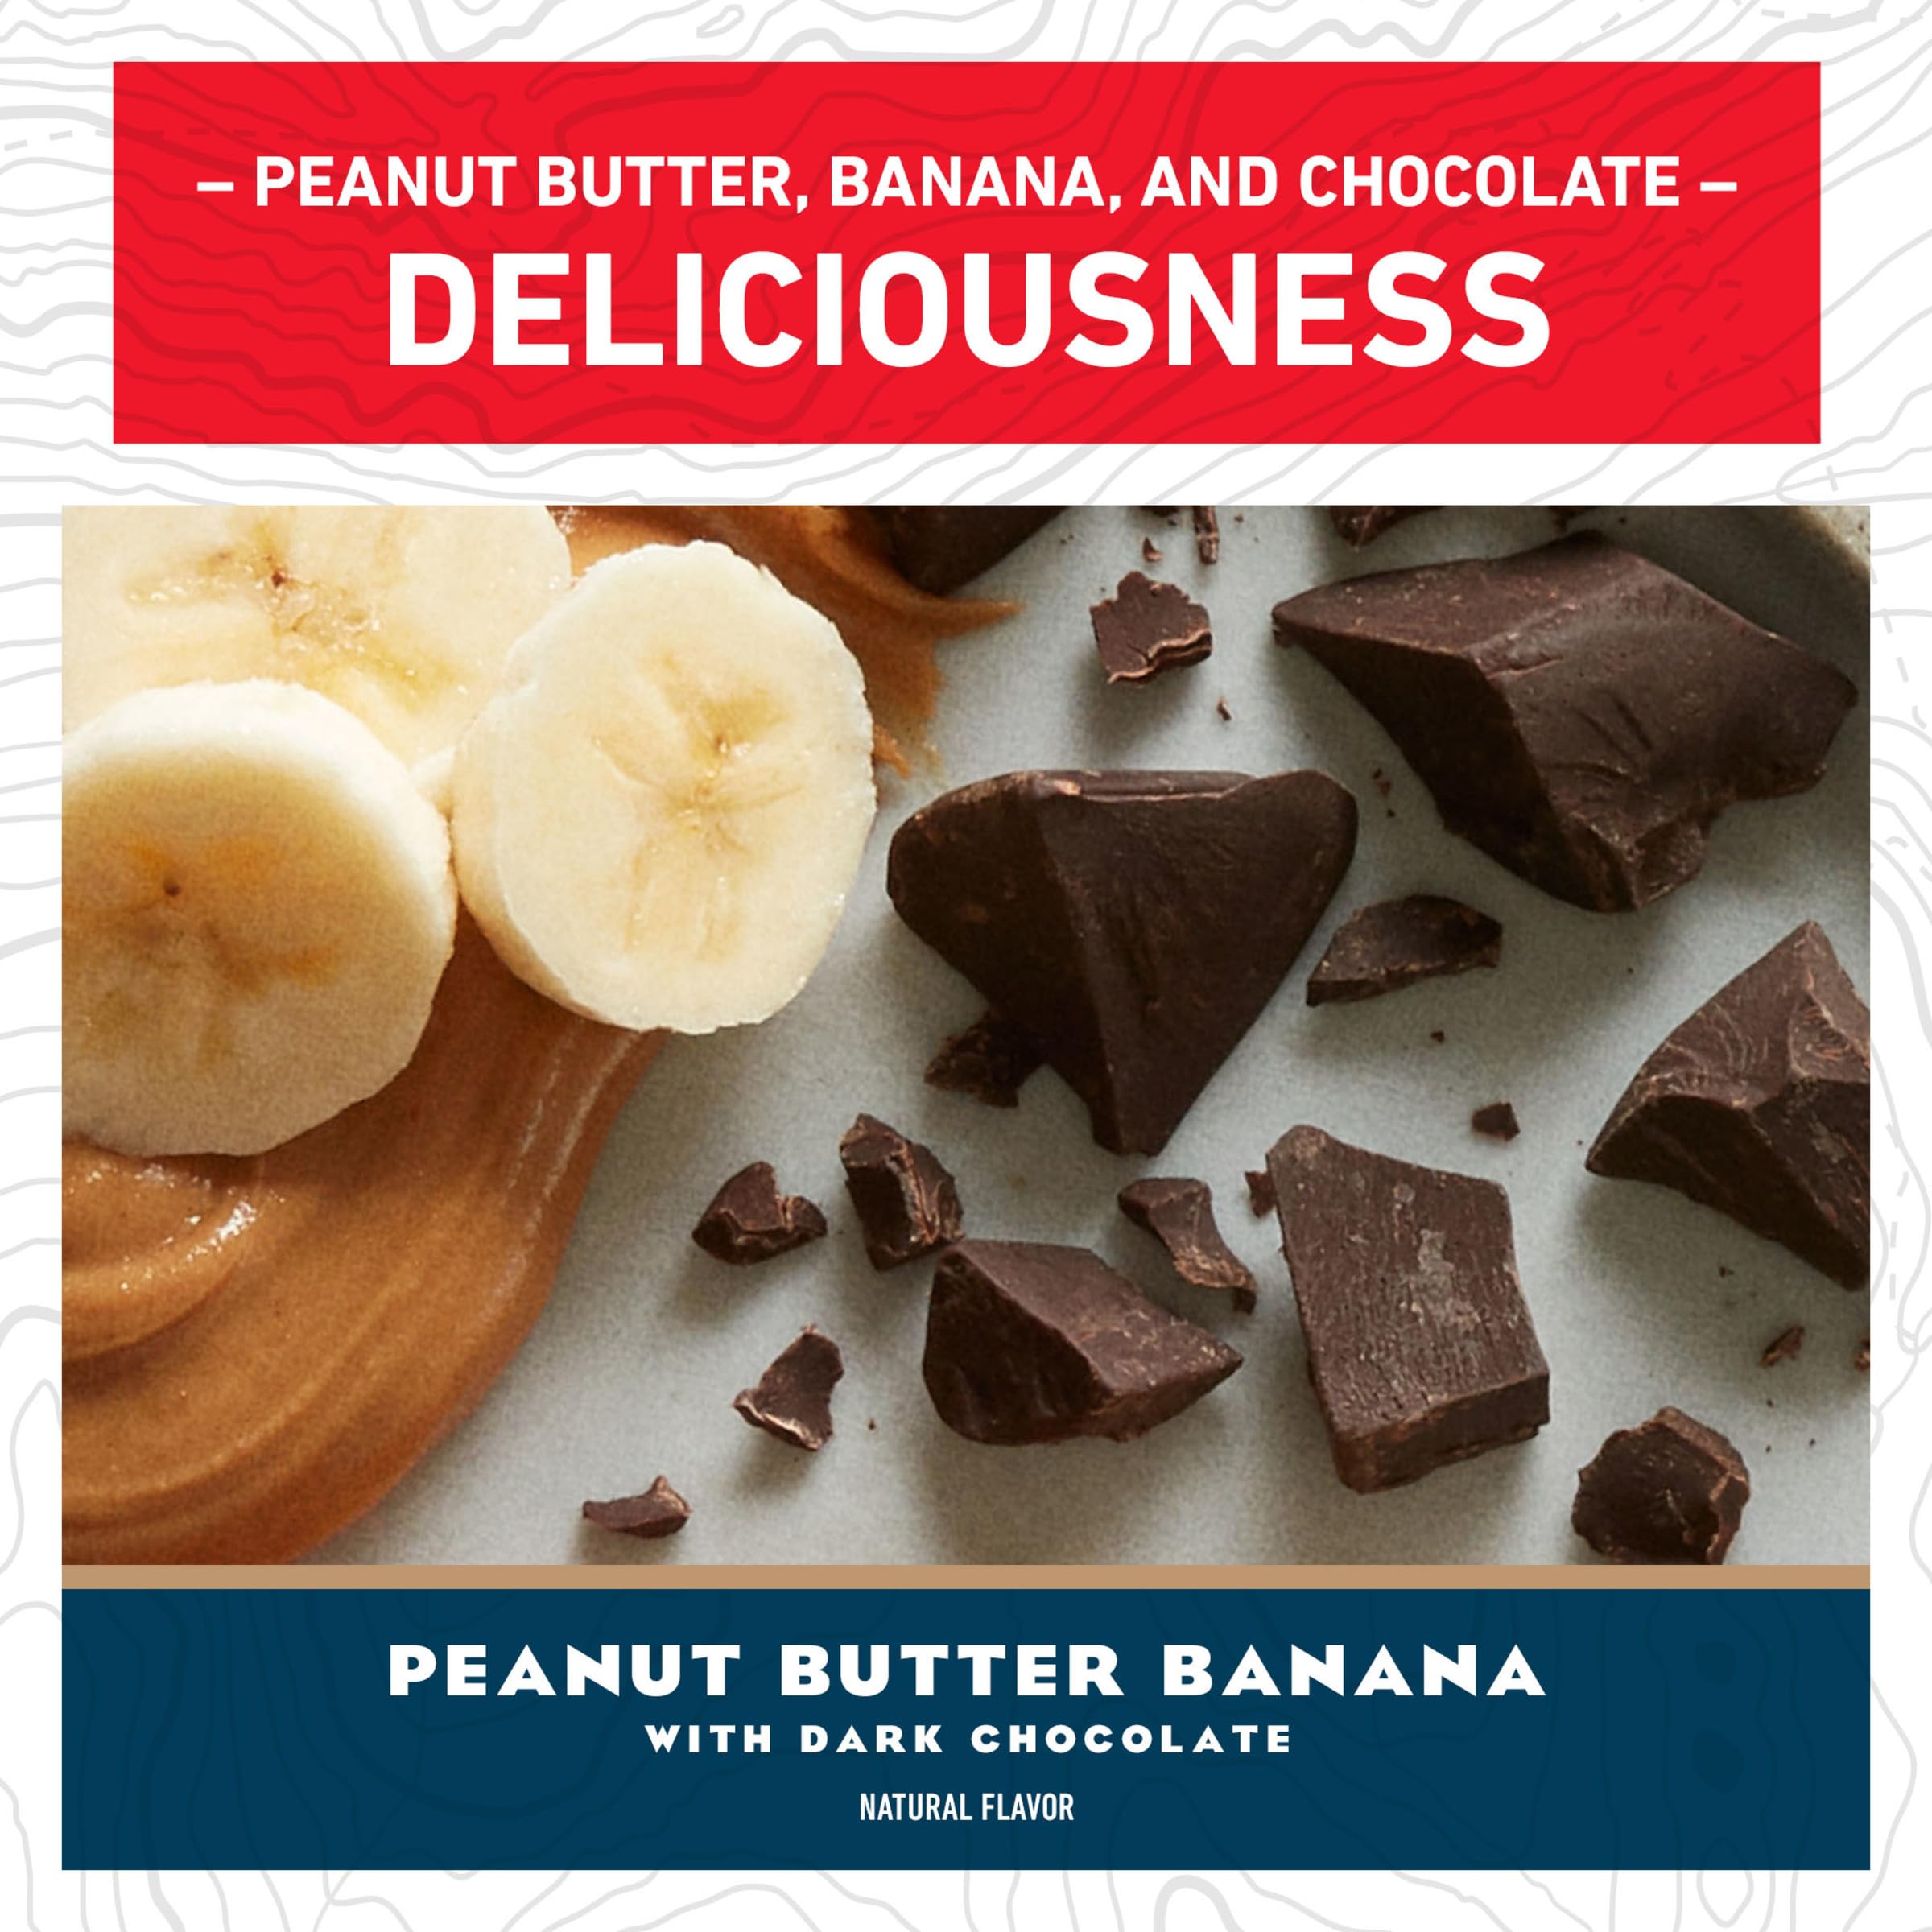 CLIF BAR - Peanut Butter Banana with Dark Chocolate Flavor - Made with Organic Oats - Non-GMO - Plant Based - Energy Bars - 2.4 oz.